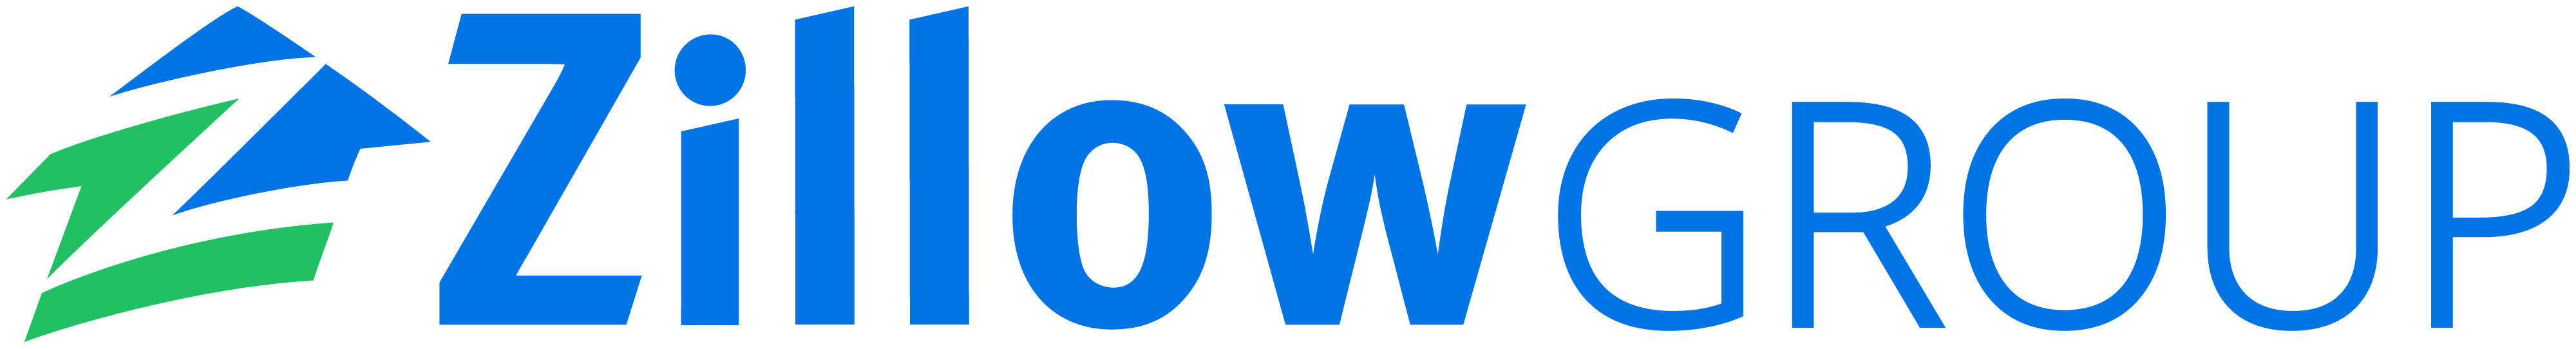 ZillowGROUP logo, green and blue